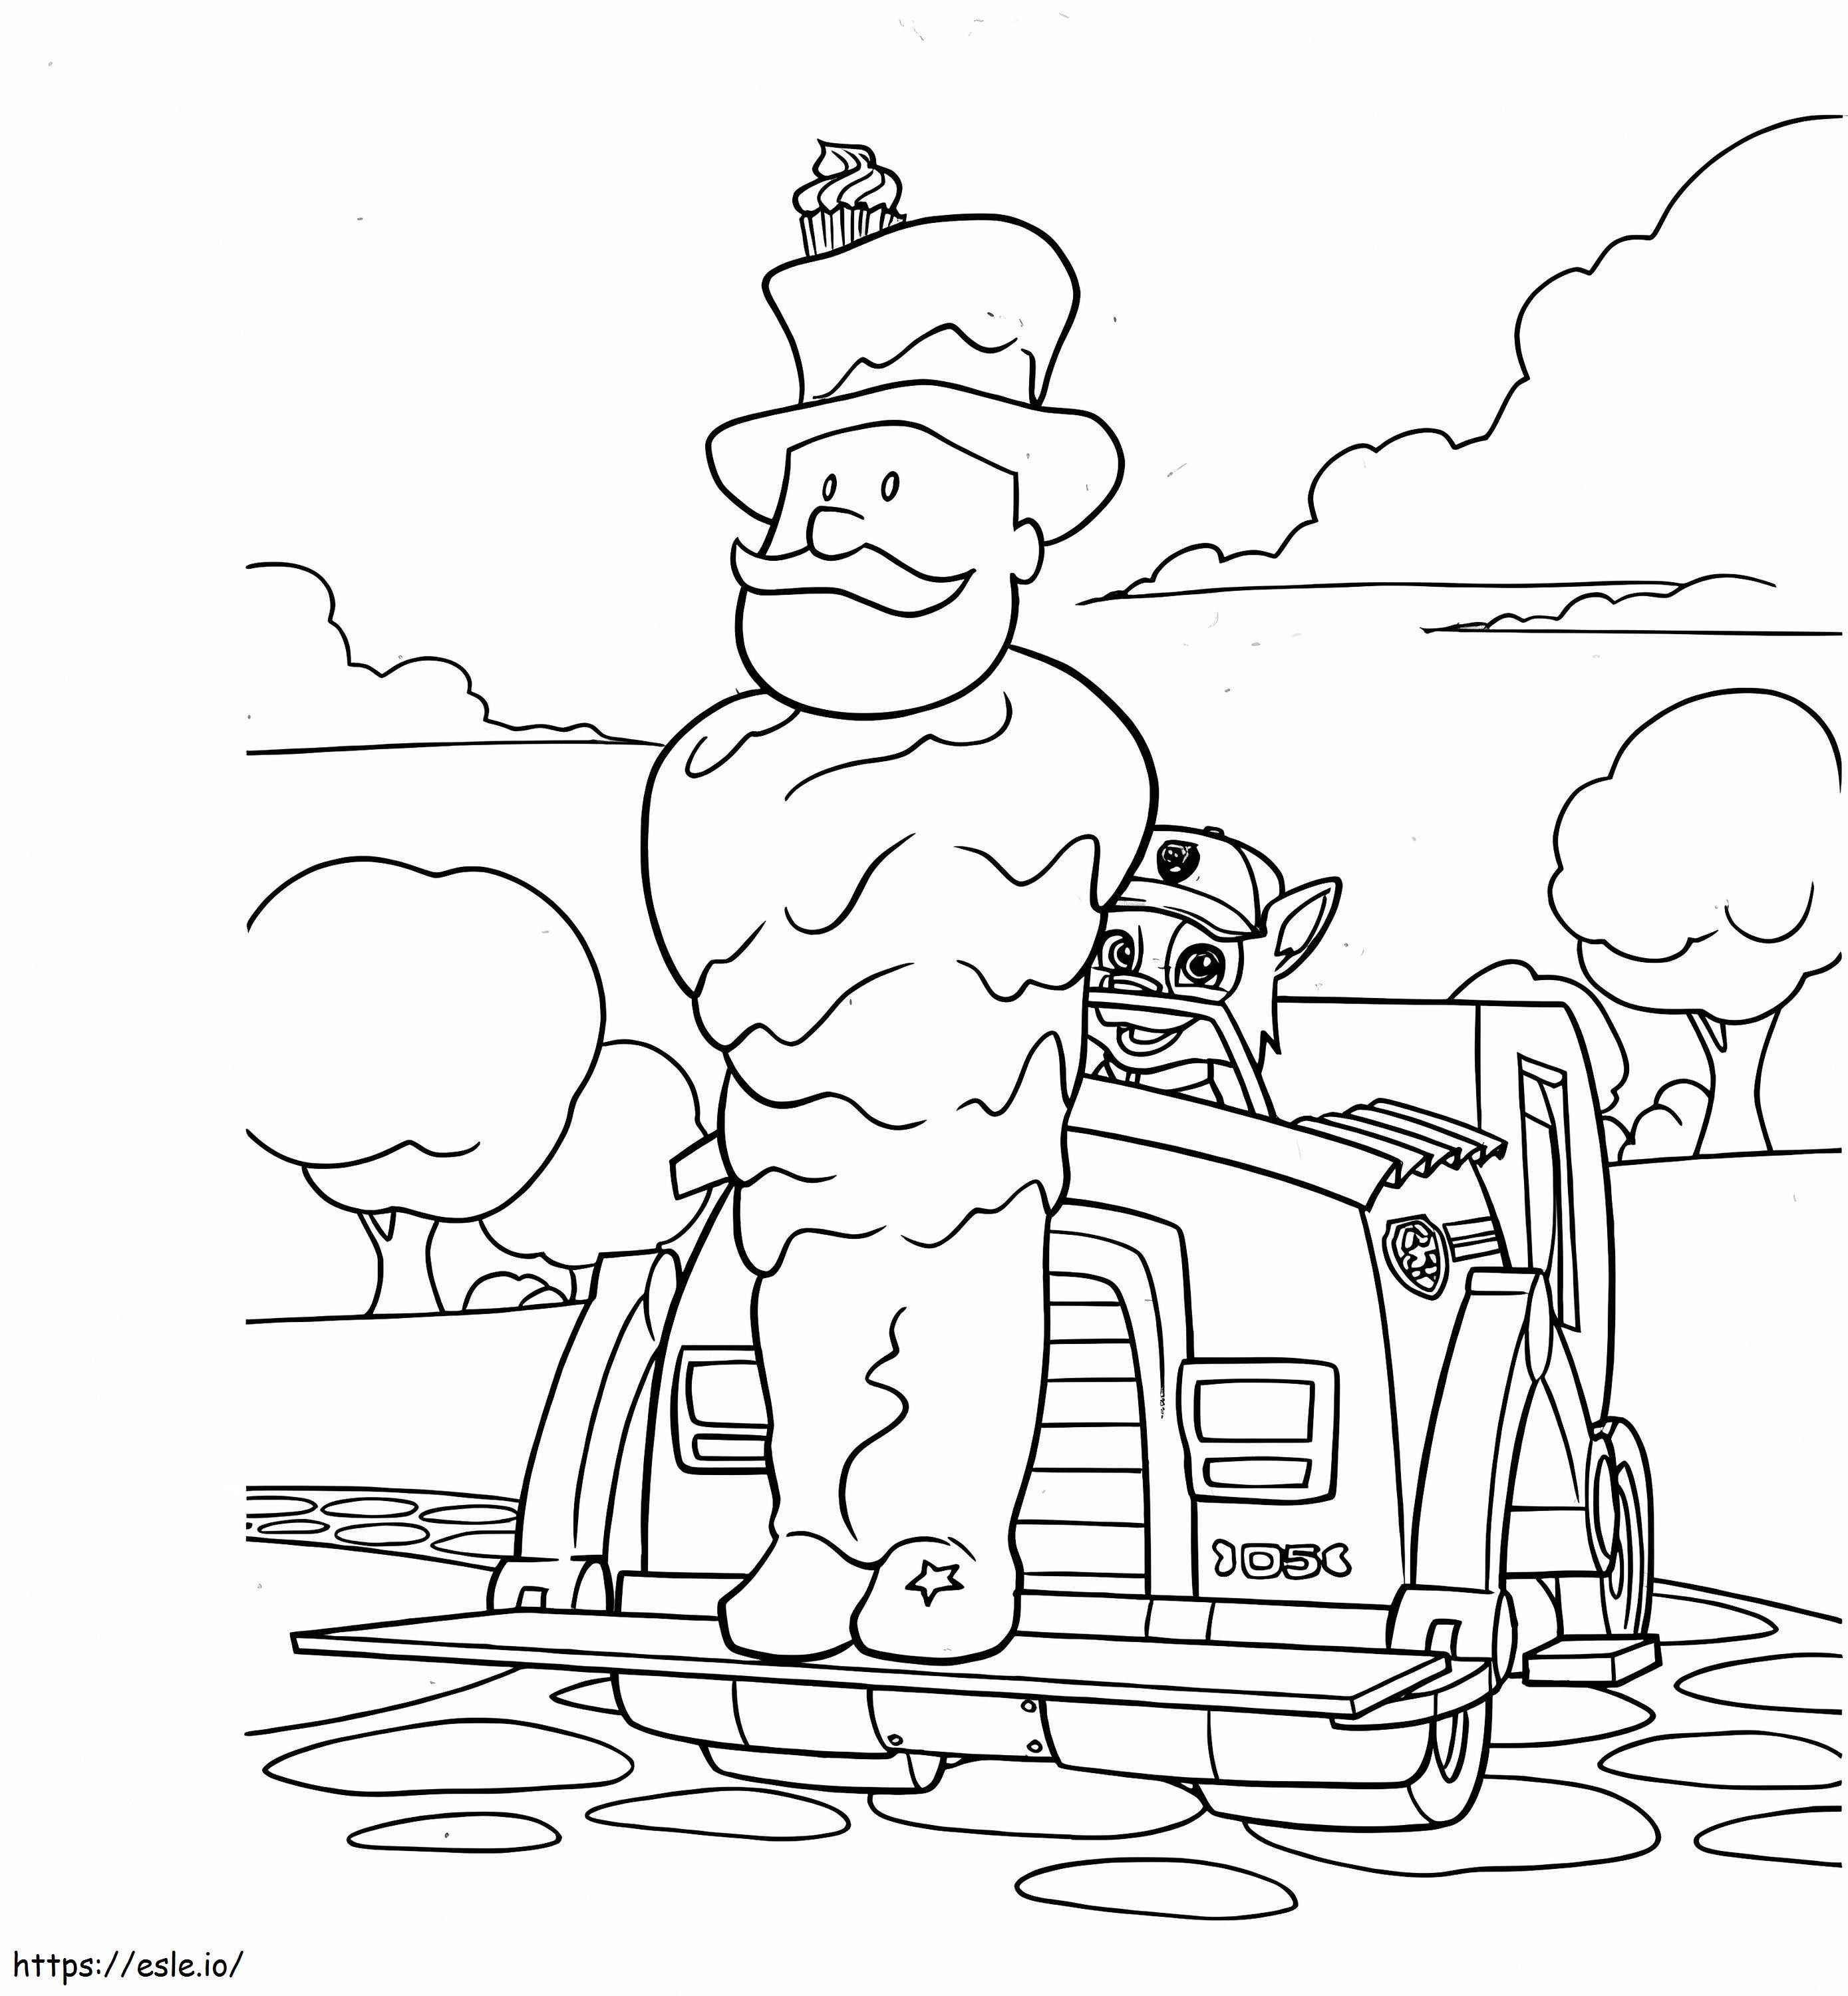 Rocky And Mayor Humdinger coloring page